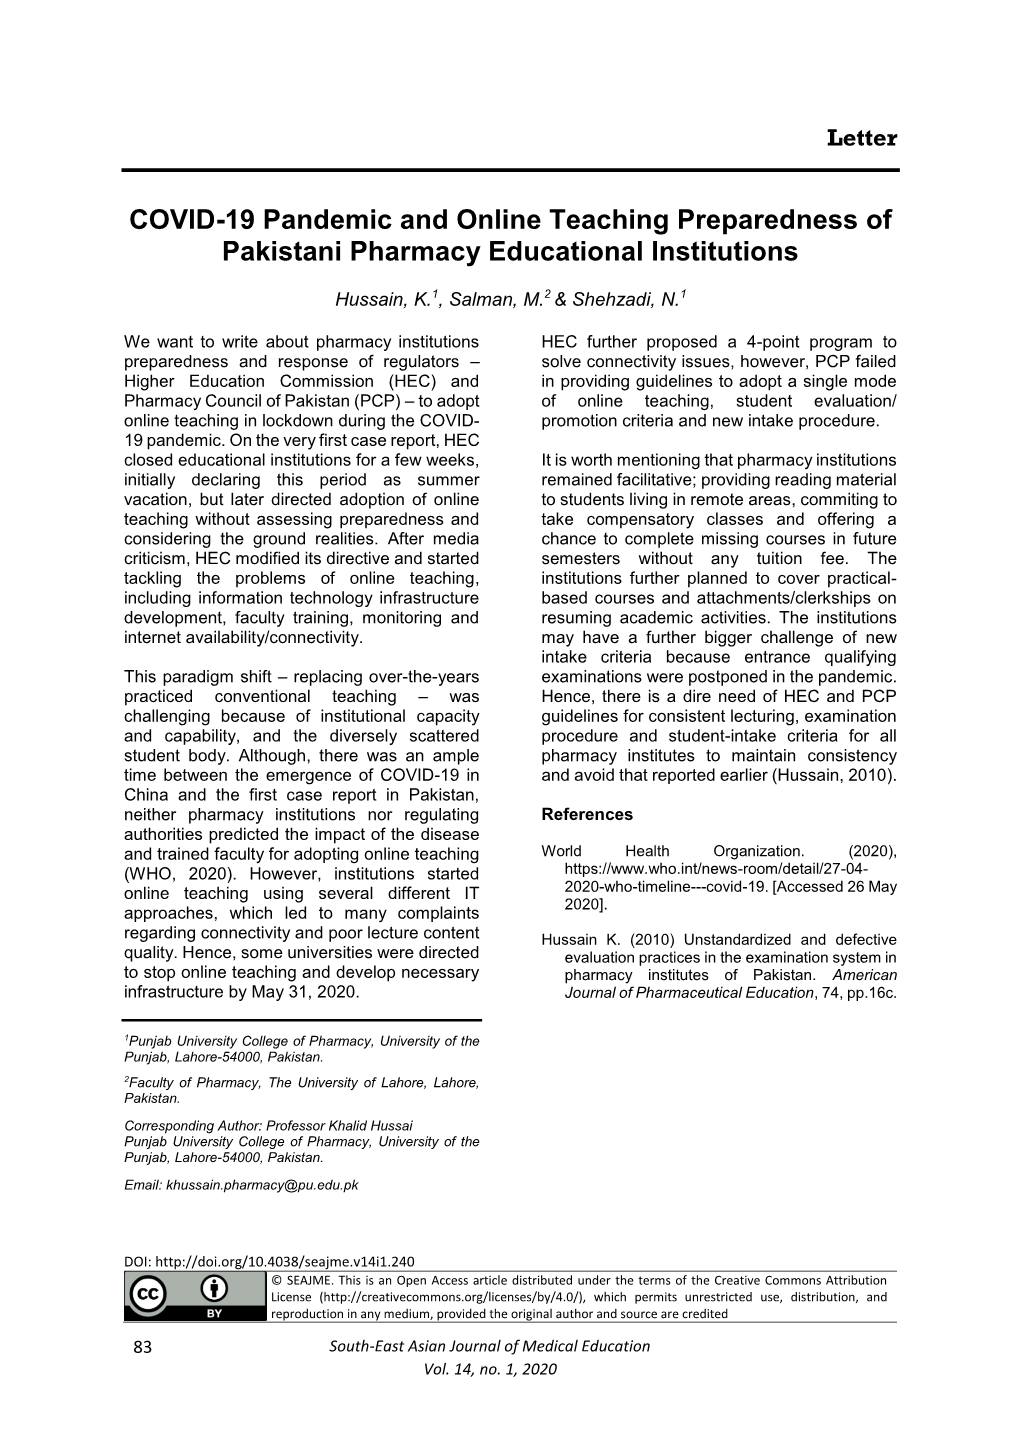 COVID-19 Pandemic and Online Teaching Preparedness of Pakistani Pharmacy Educational Institutions